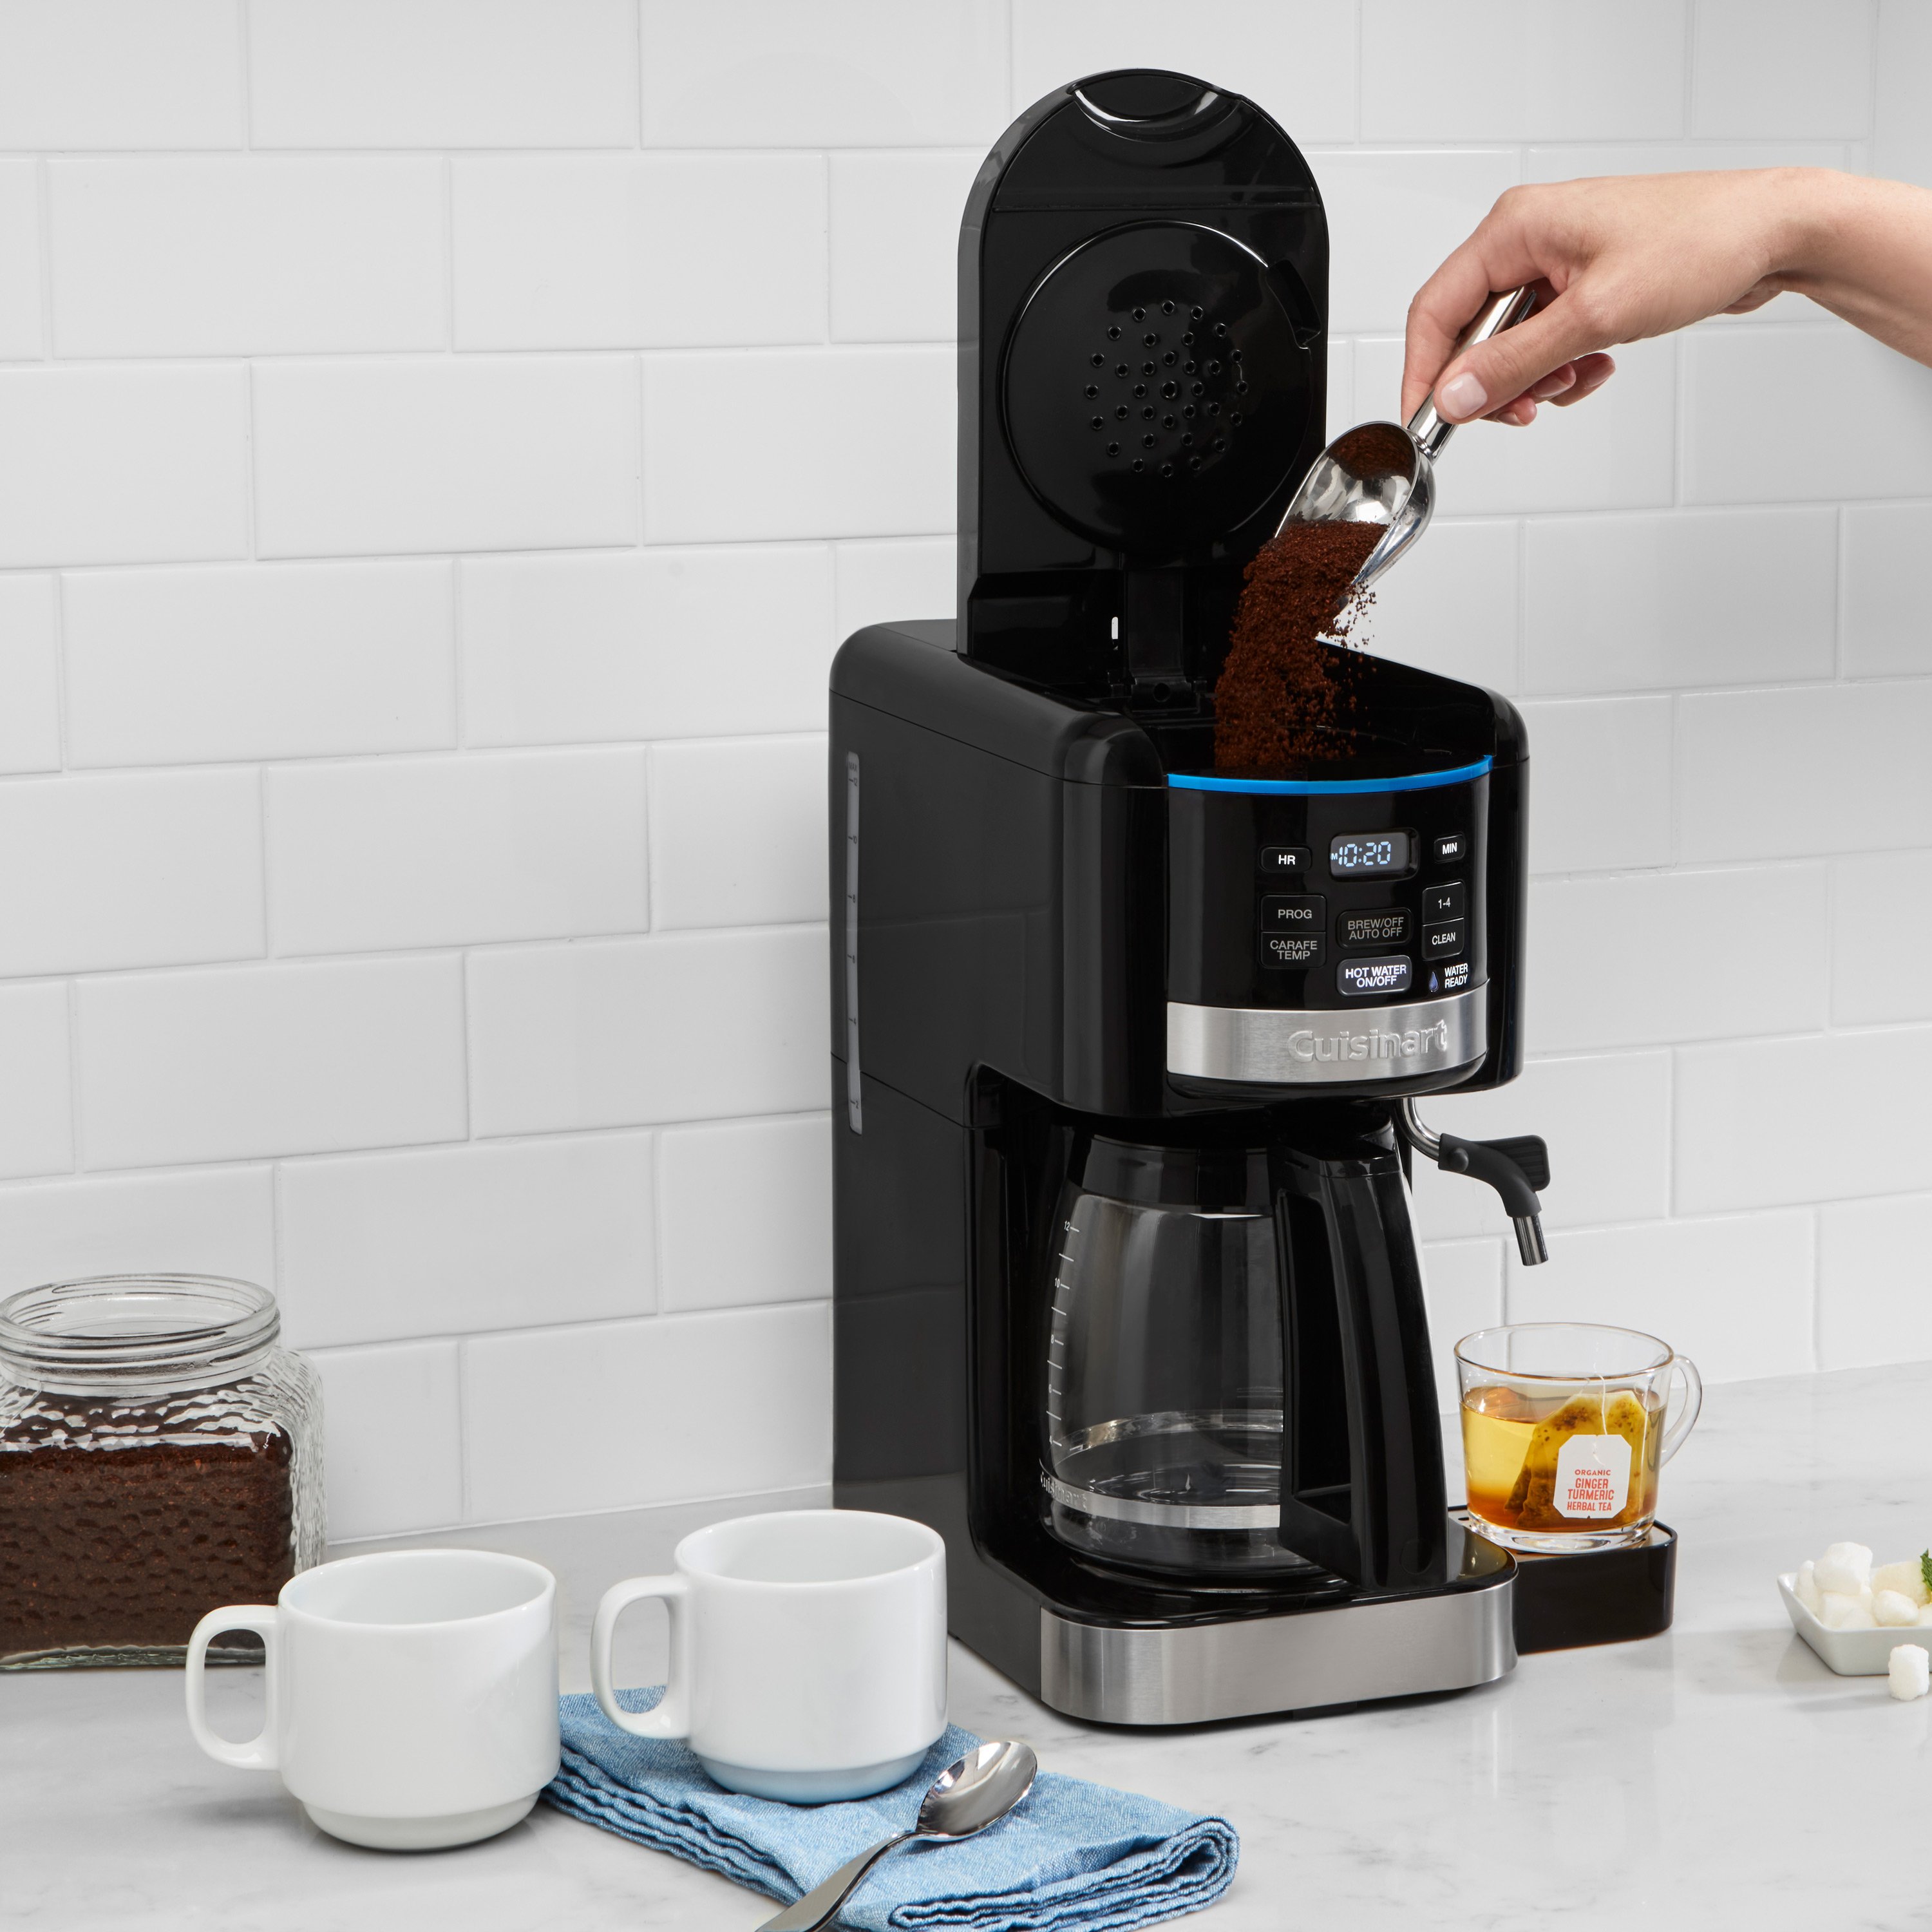 How to Easily Program Your Cuisinart Coffee Maker